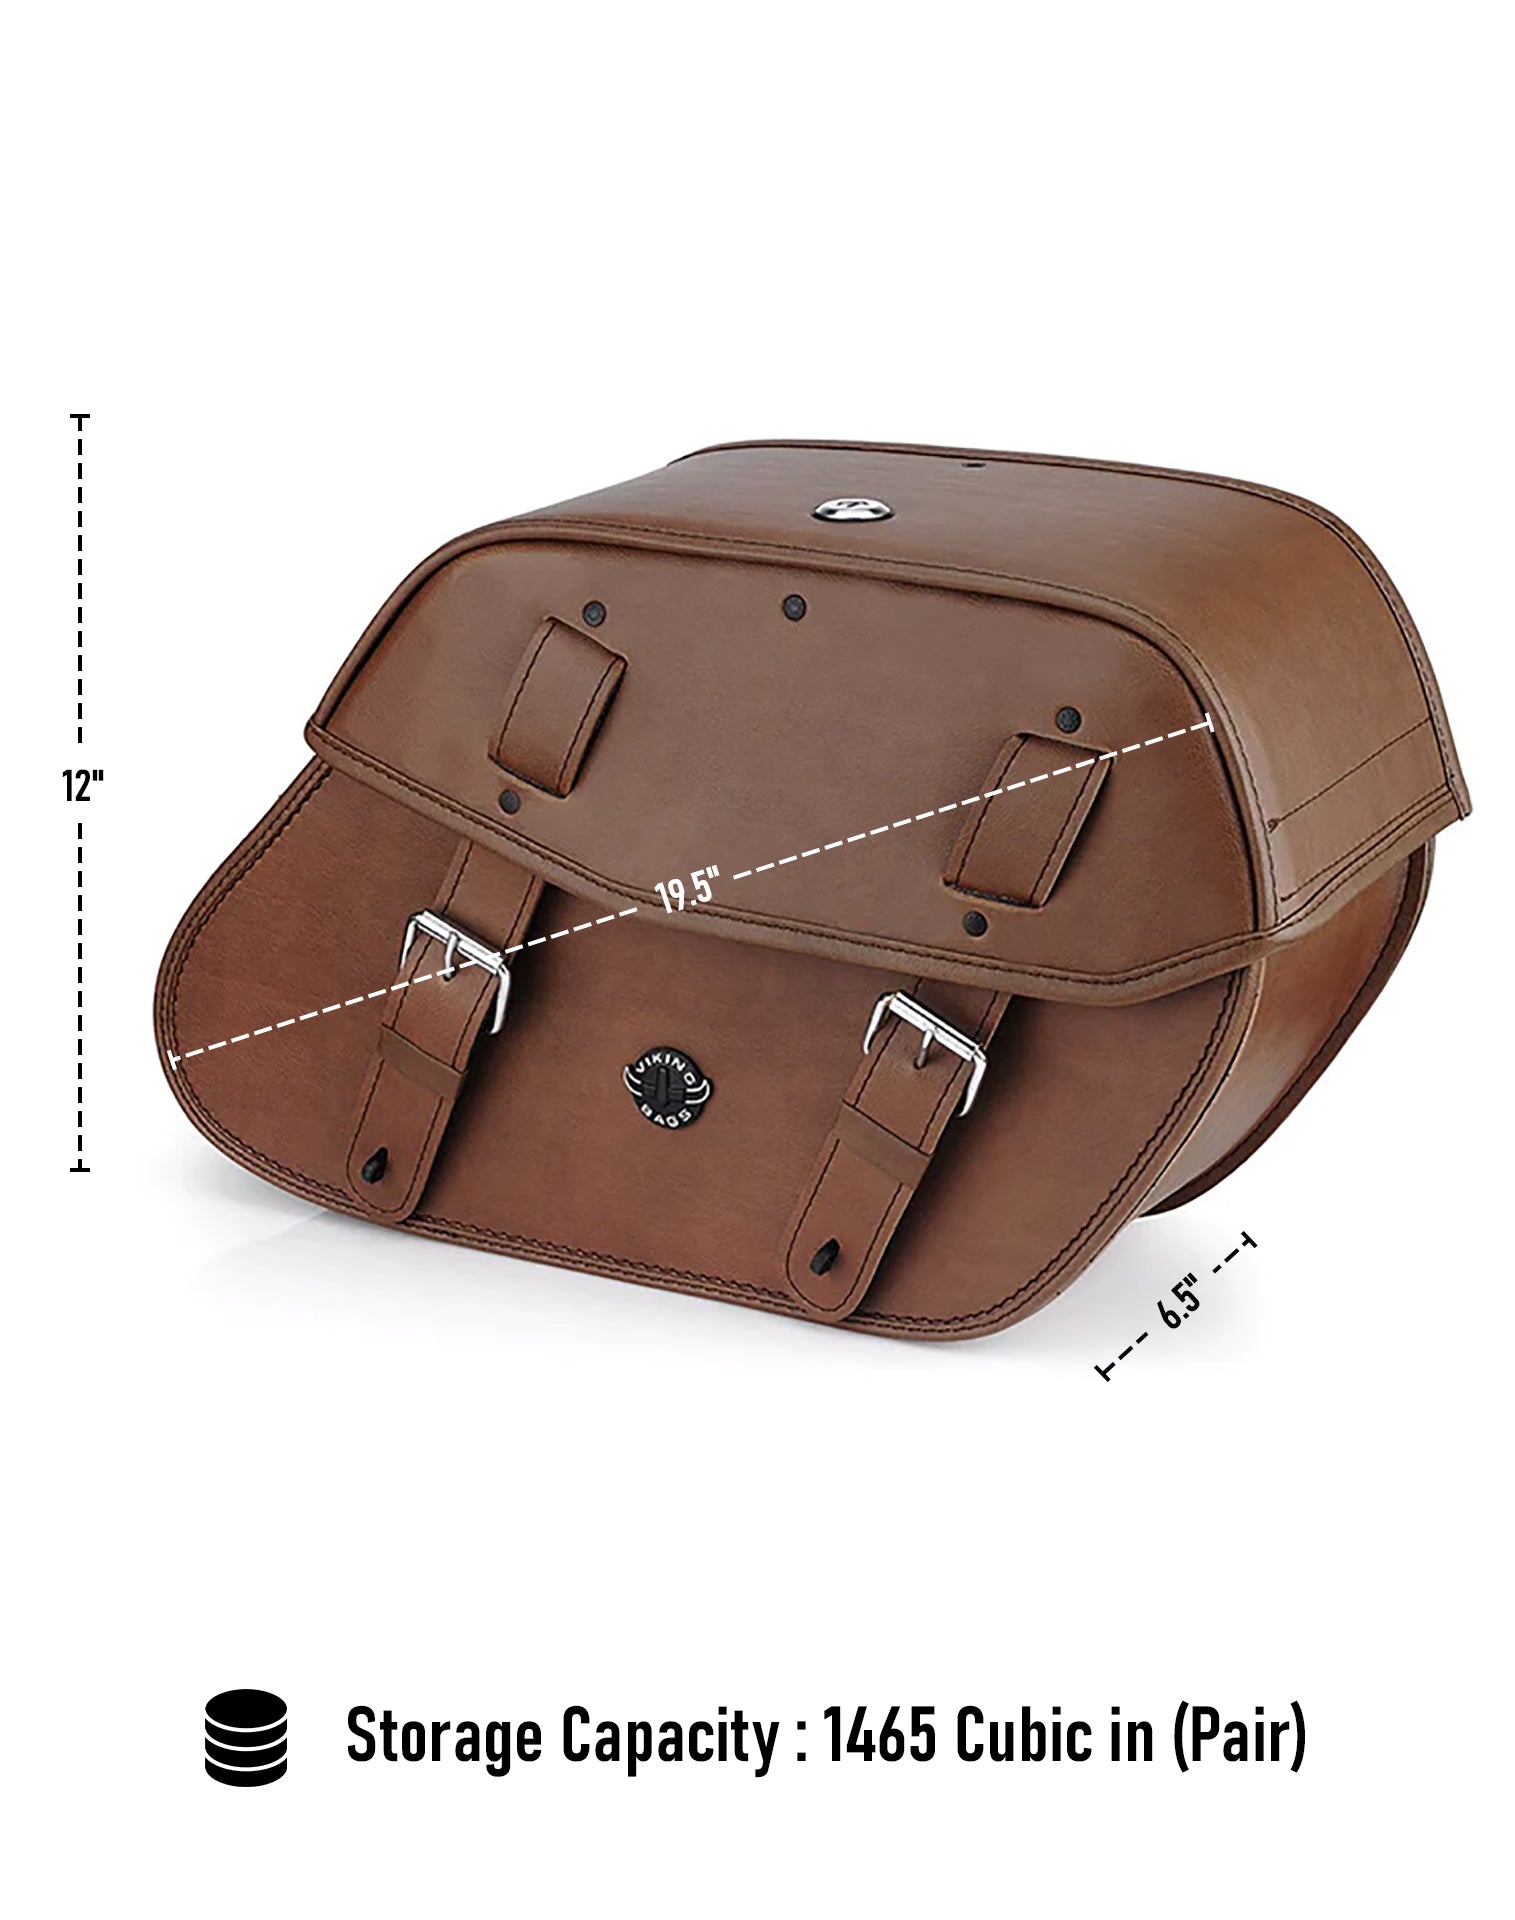 Viking Odin Brown Large Suzuki Boulevard C50 Vl800 Leather Motorcycle Saddlebags Can Store Your Ridings Gears